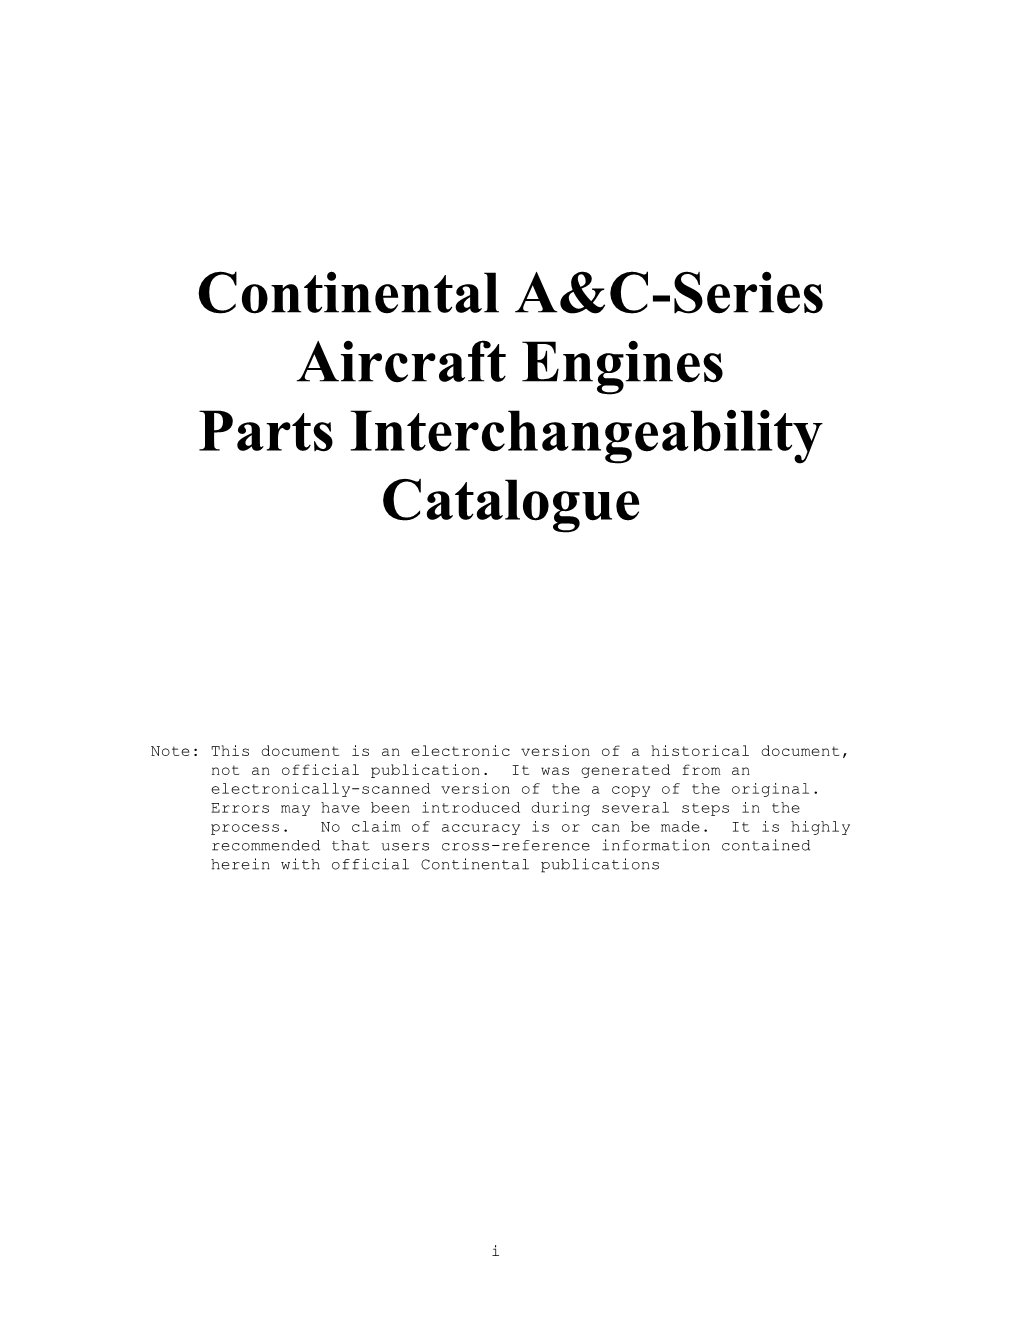 Continental A&C-Series Aircraft Engines Parts Interchangeability